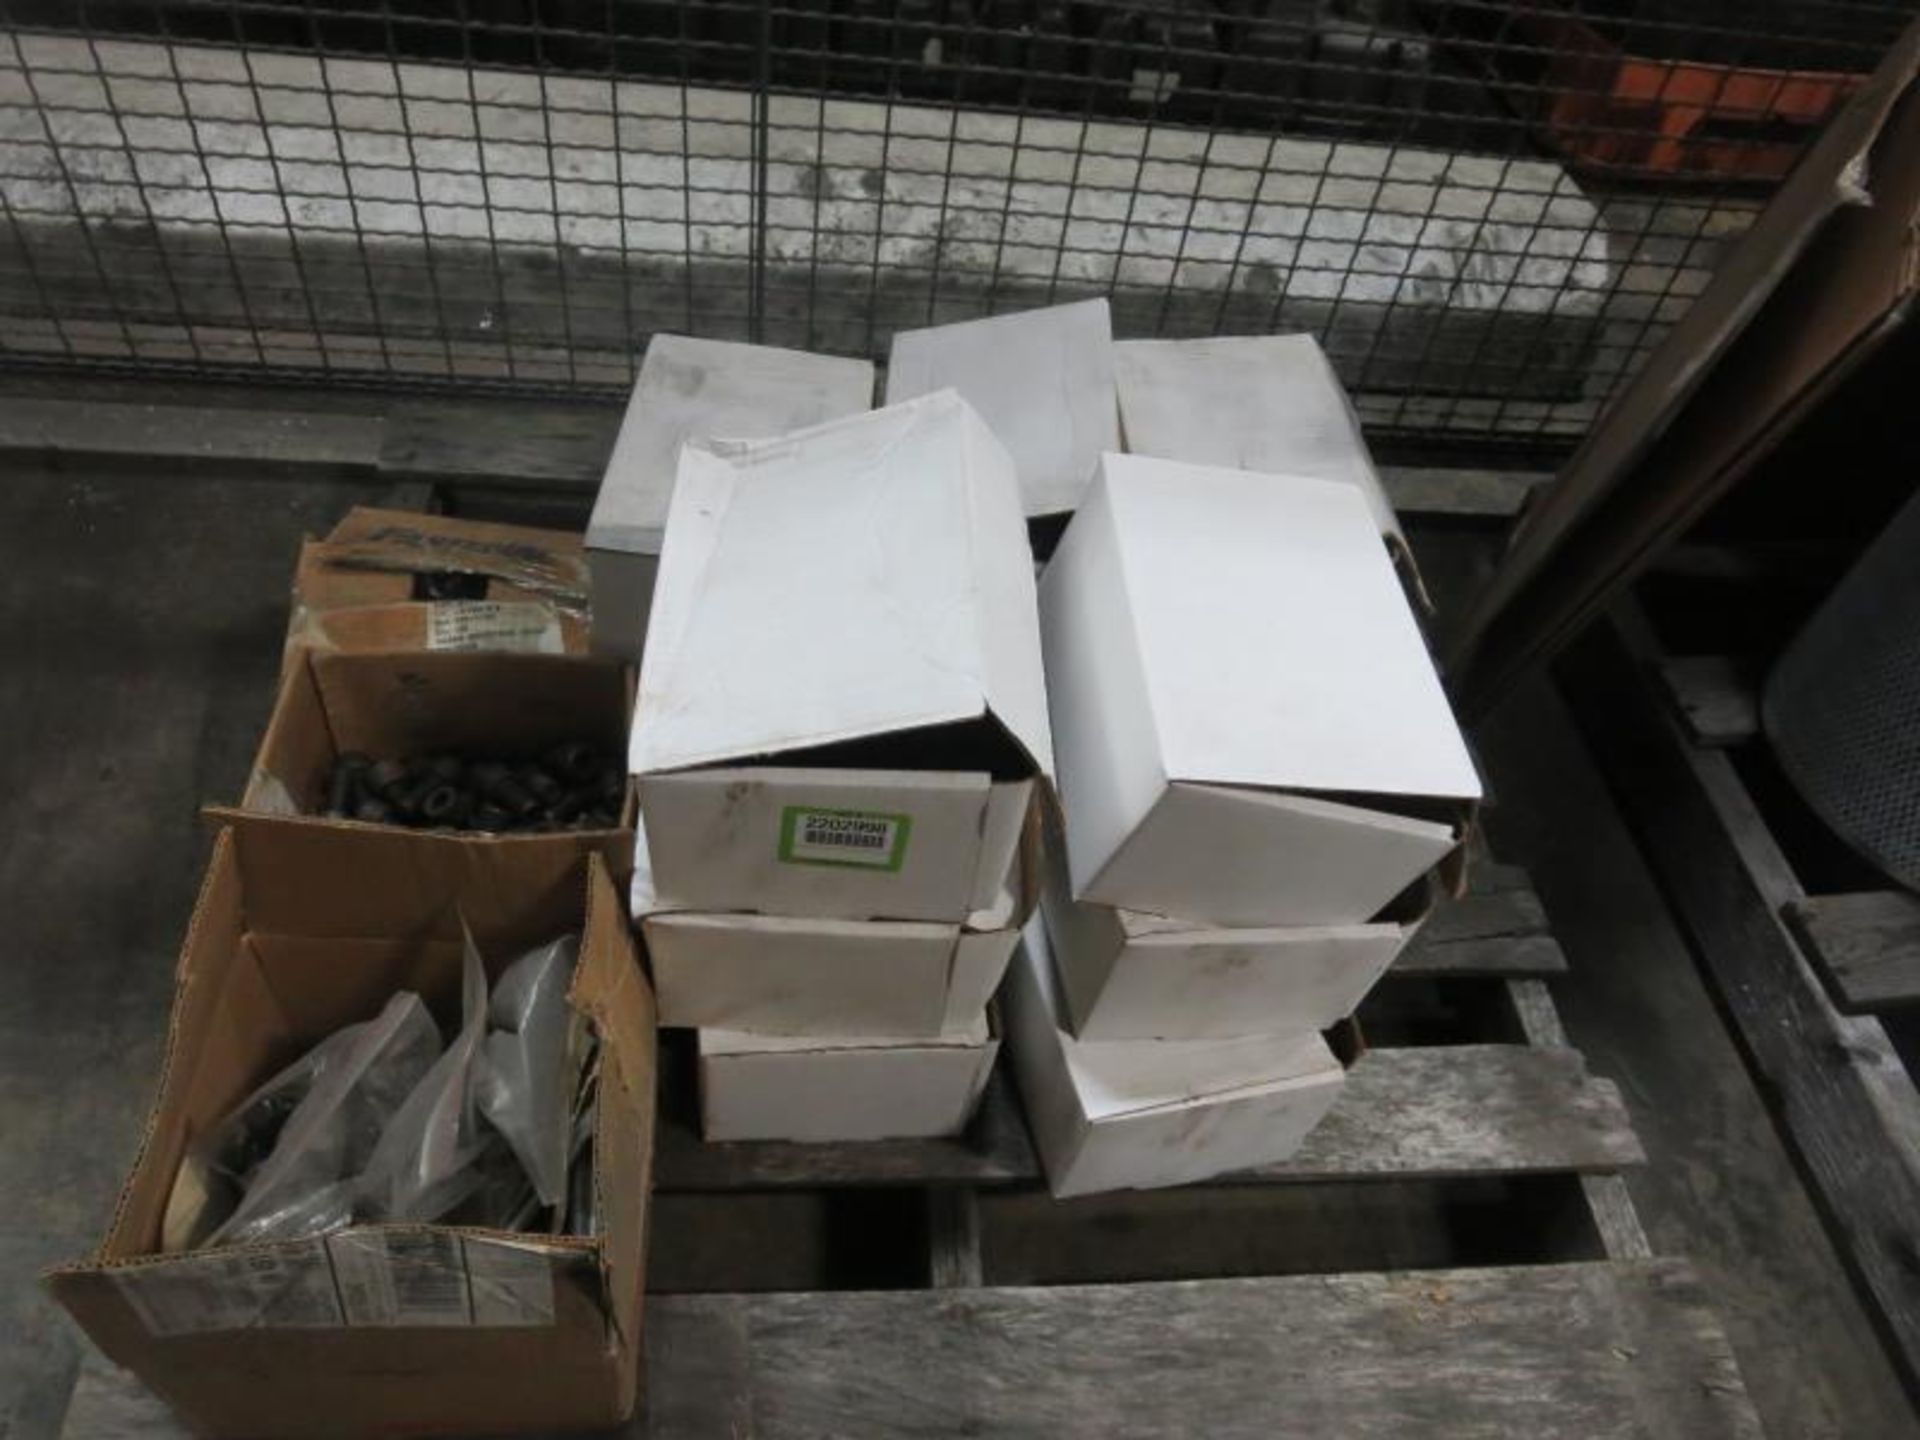 Lot 1 Skid, with 15 boxes of Nuts & Bolts. Hit # 2202998. Bldg.1 Cage. Asset Located at 820 S Post